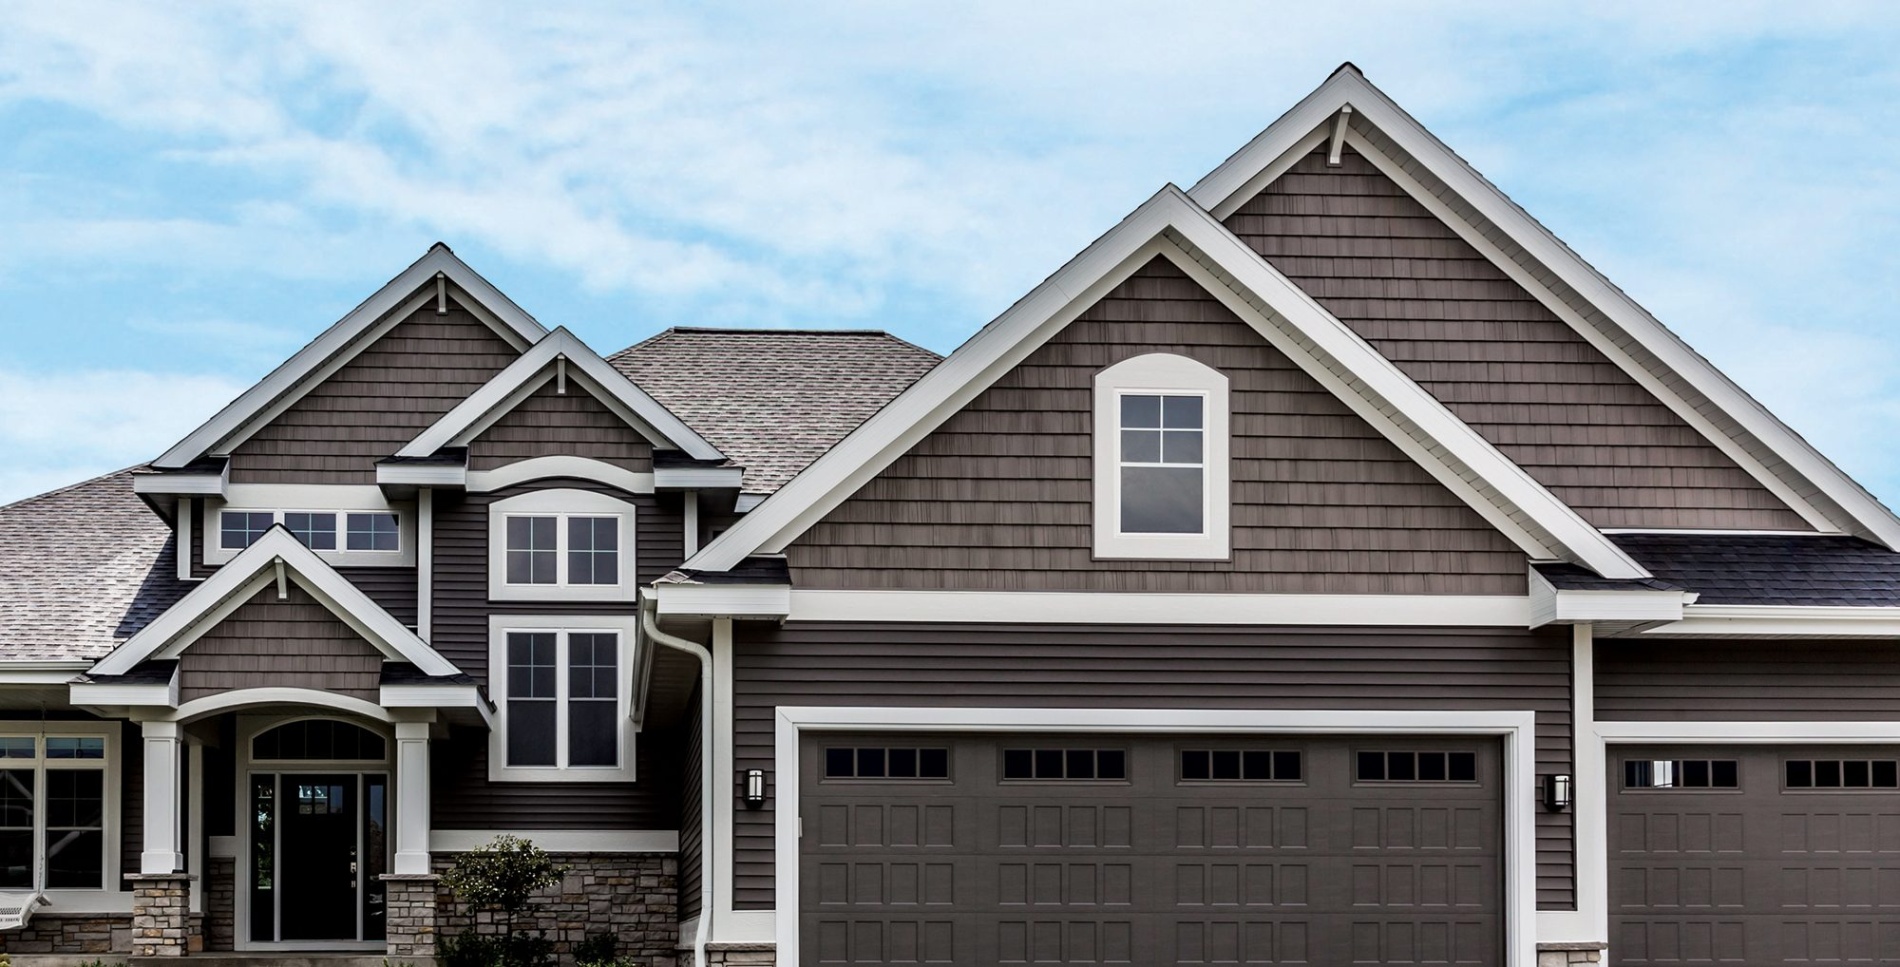 Upgrade Your Vinyl Siding Game With These Stylish Accessories!